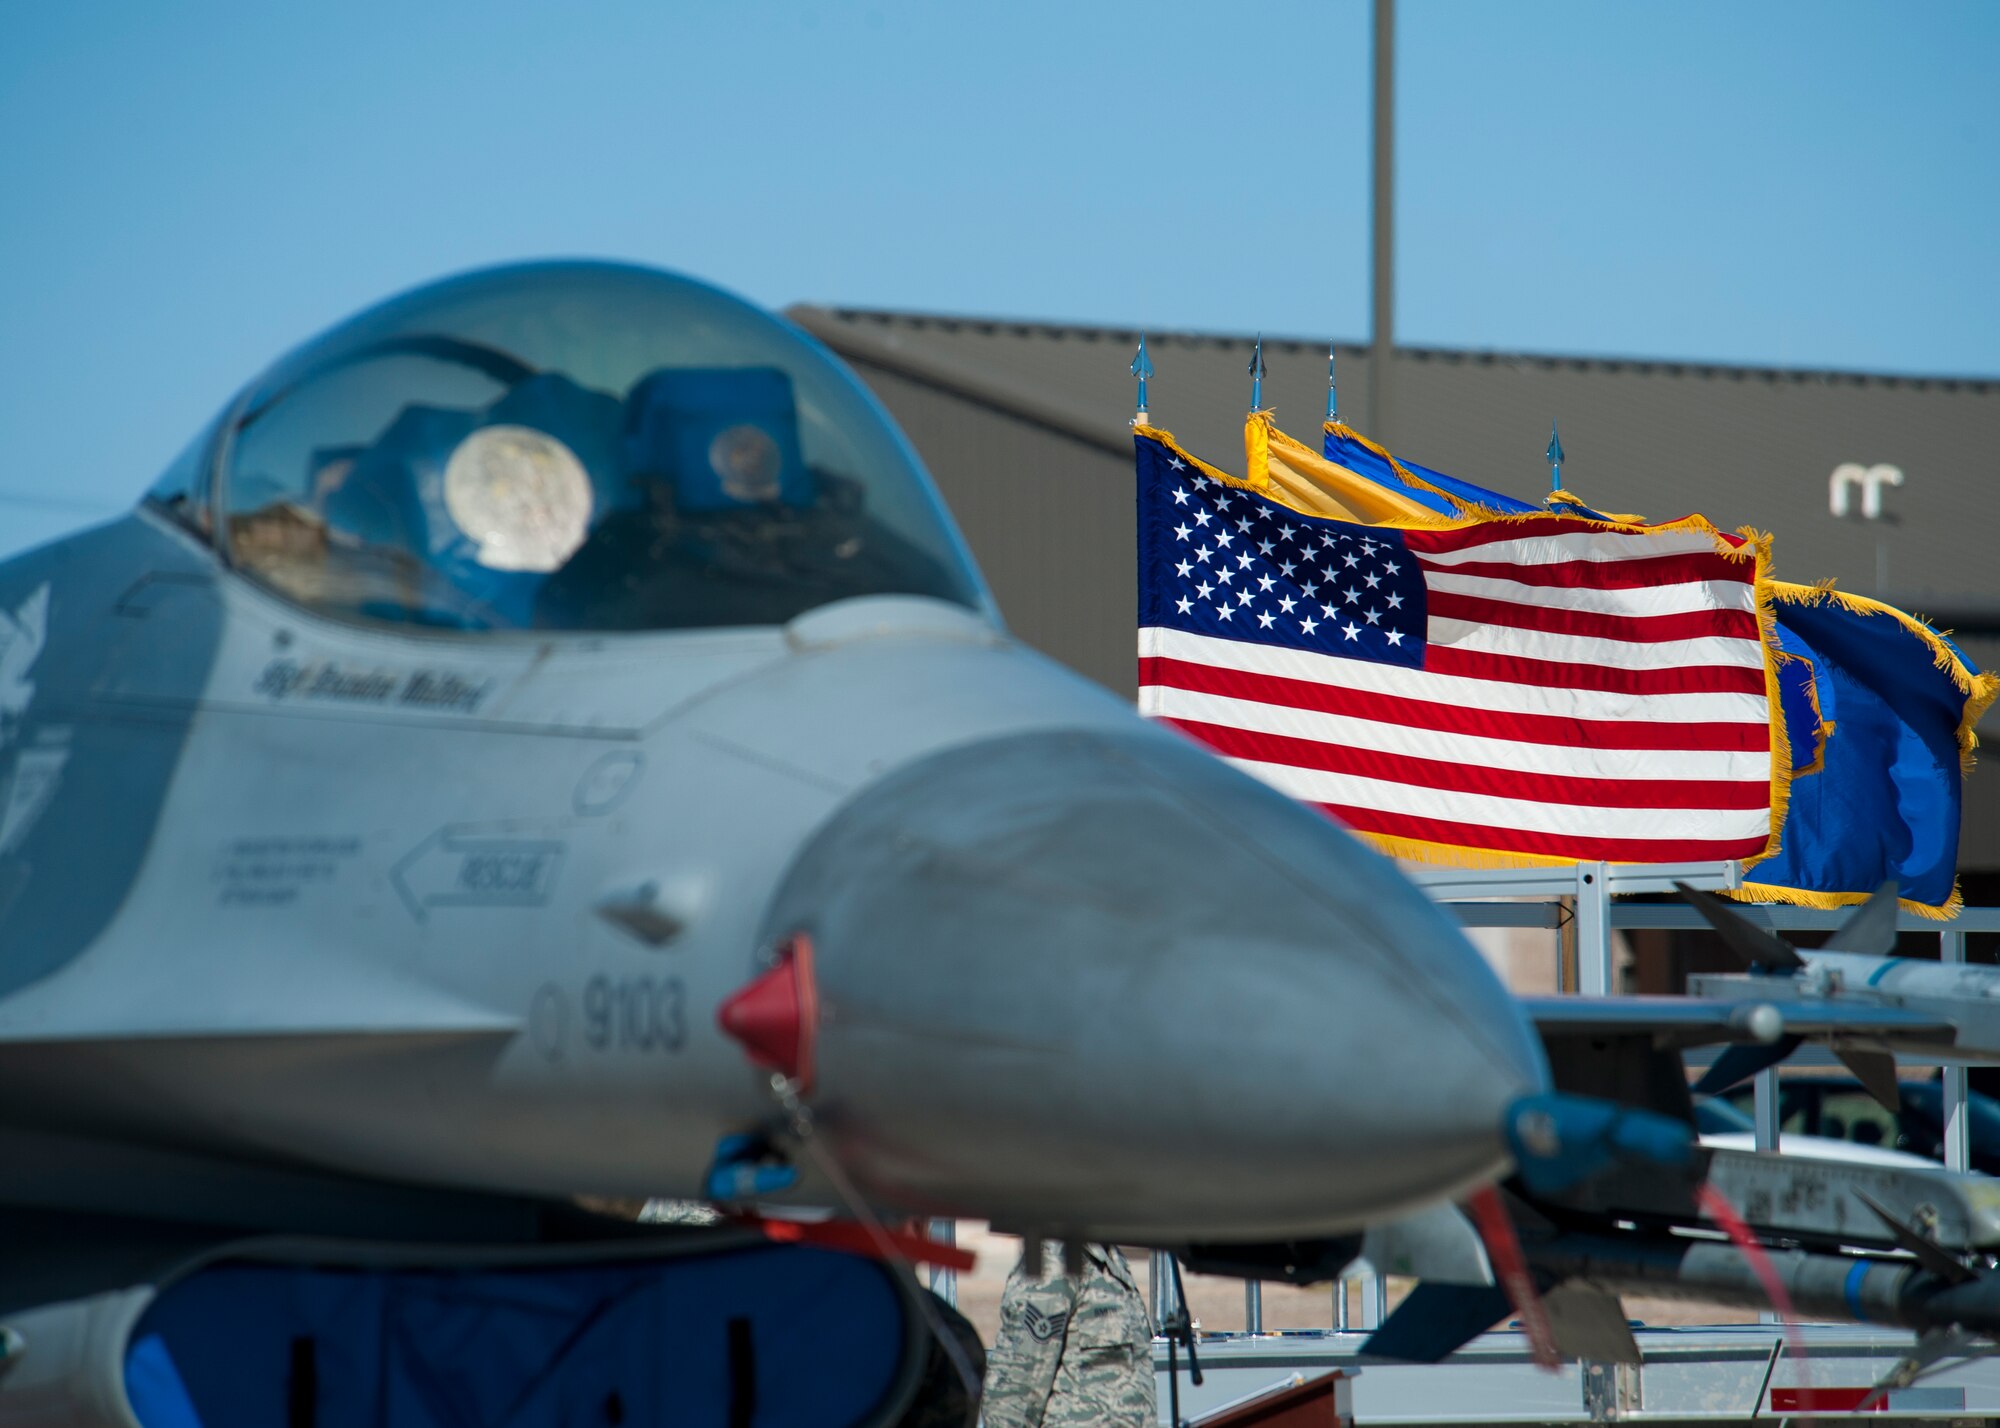 An F-16 Falcon is displayed during the 54th Fighter Group activation at Holloman Air Force Base, N.M., March 11. The 54th Fighter Group, a tenant unit at Holloman, is a detachment the 56th Fighter Wing at Luke Air Force Base, Ariz., and will ultimately operate two F-16 Fighting Falcon aircraft training squadrons. The 54th Fighter Group plus three squadrons were activated at the ceremony: the 311th Fighter Squadron, the 54th Operations Support Squadron and the 54th Aircraft Maintenance Squadron. (U.S. Air Force photo by Airman 1st Class Aaron Montoya / Released)